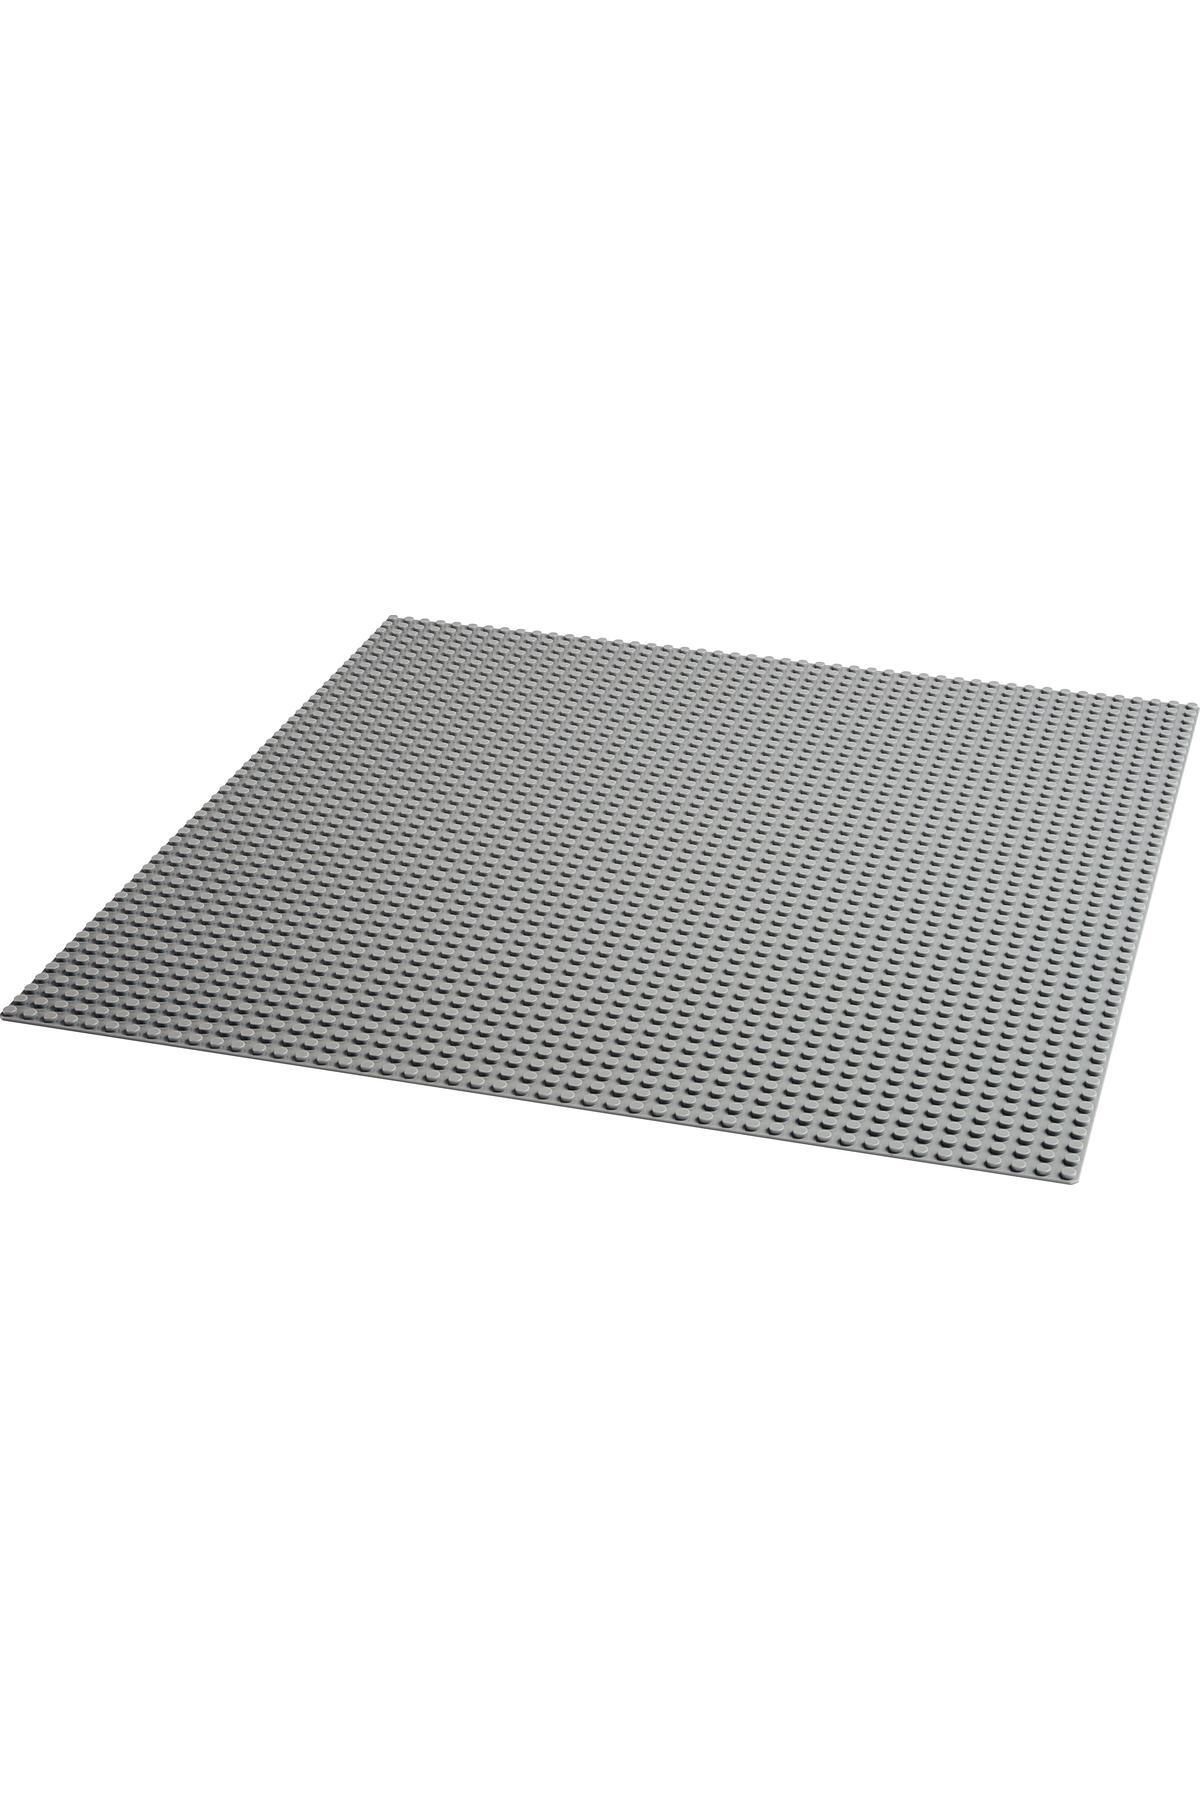 Lego 11024 Grey Base Plate 48x48, Hobbies & Toys, Toys & Games on